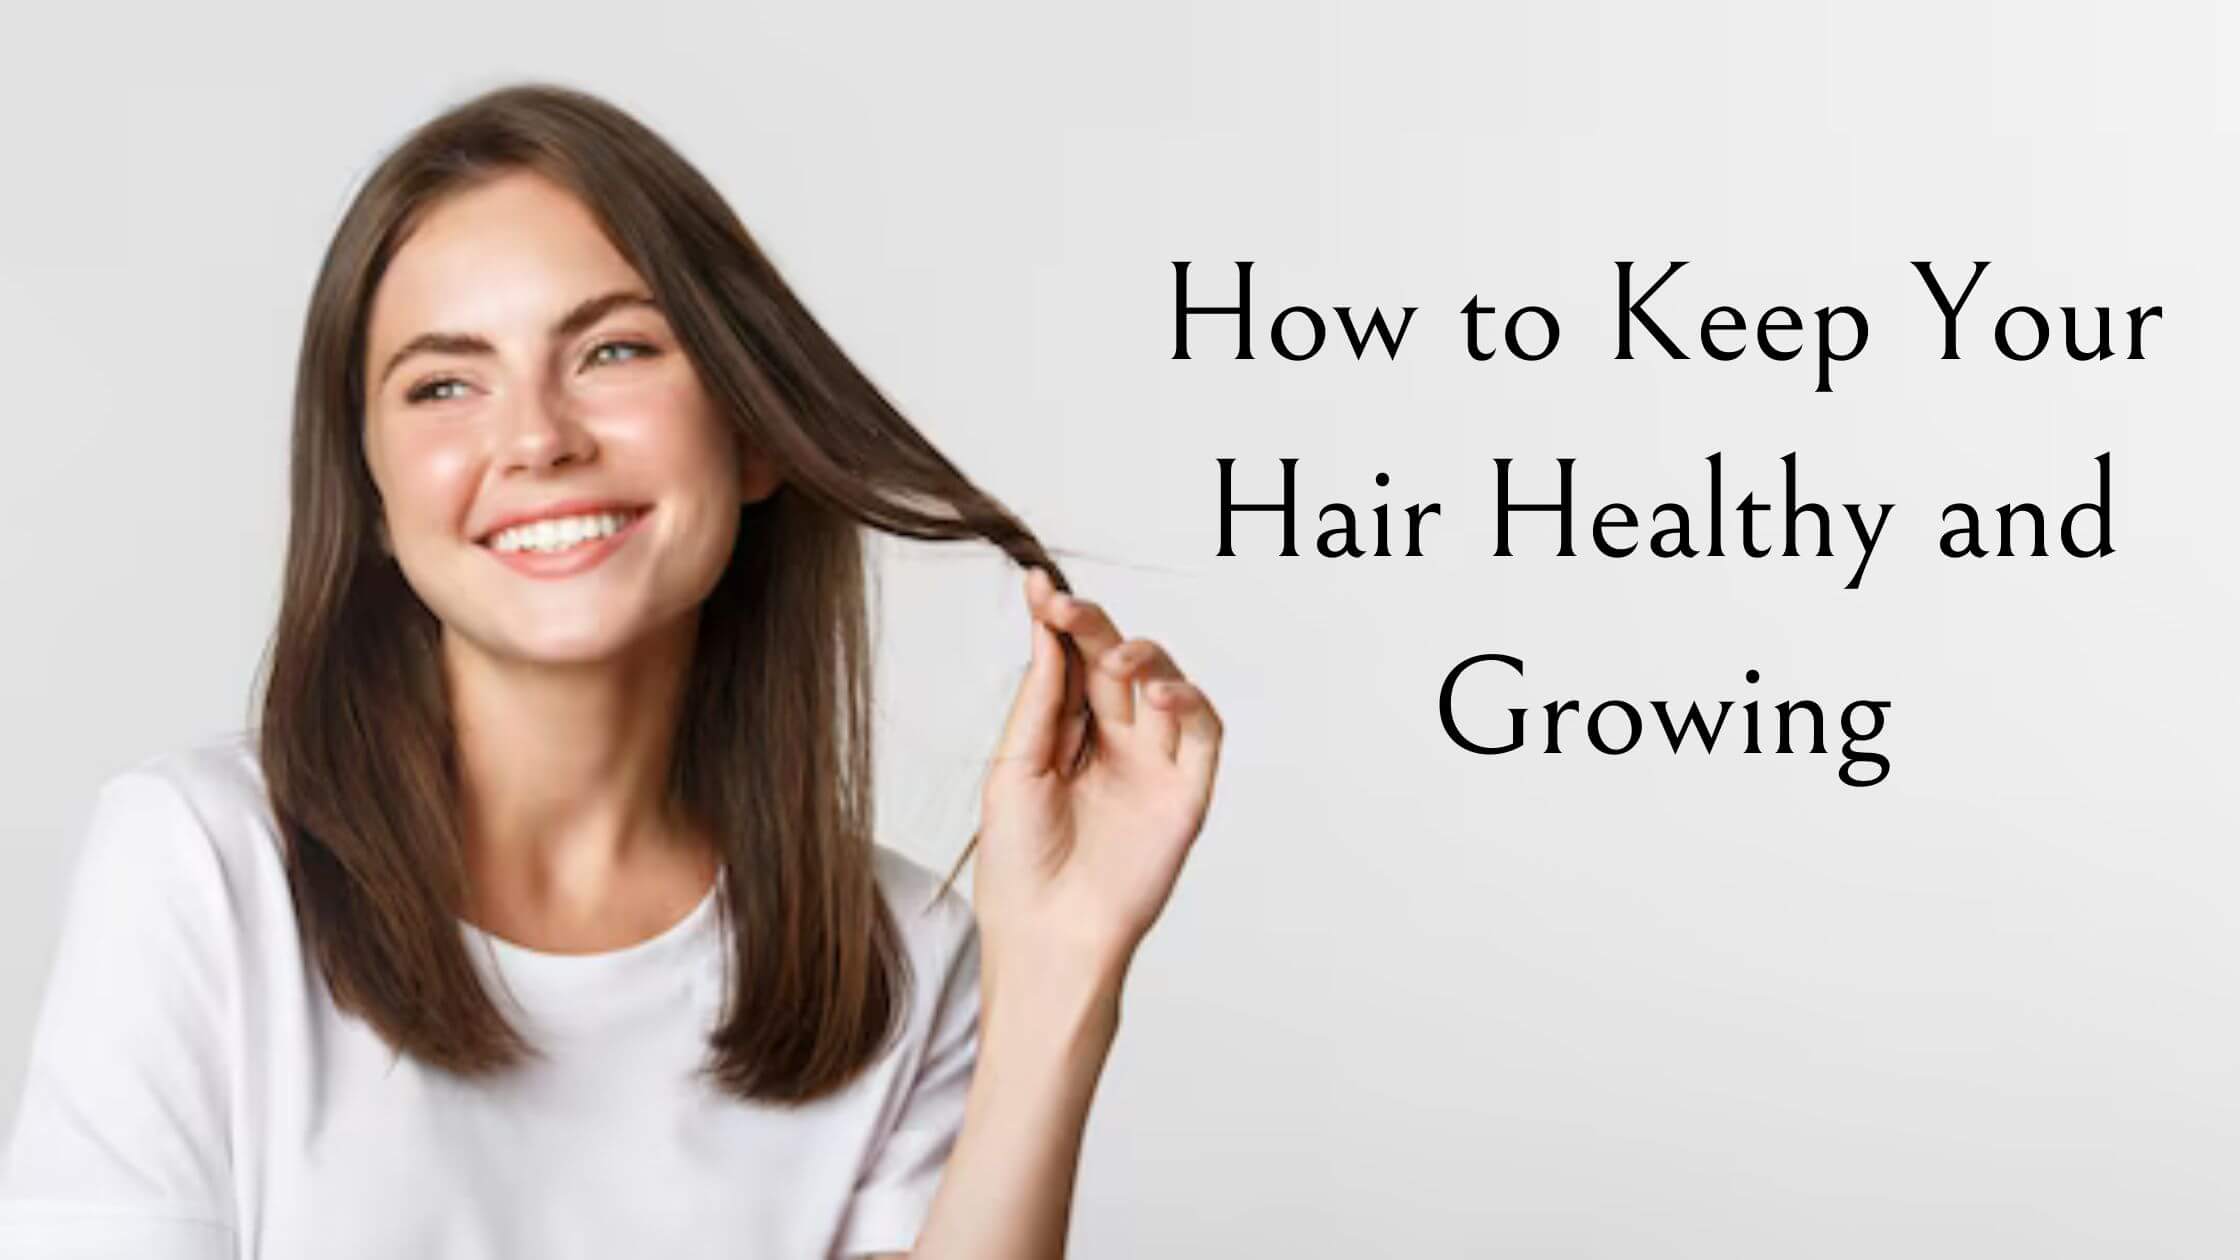 How to Keep Your Hair Healthy and Growing